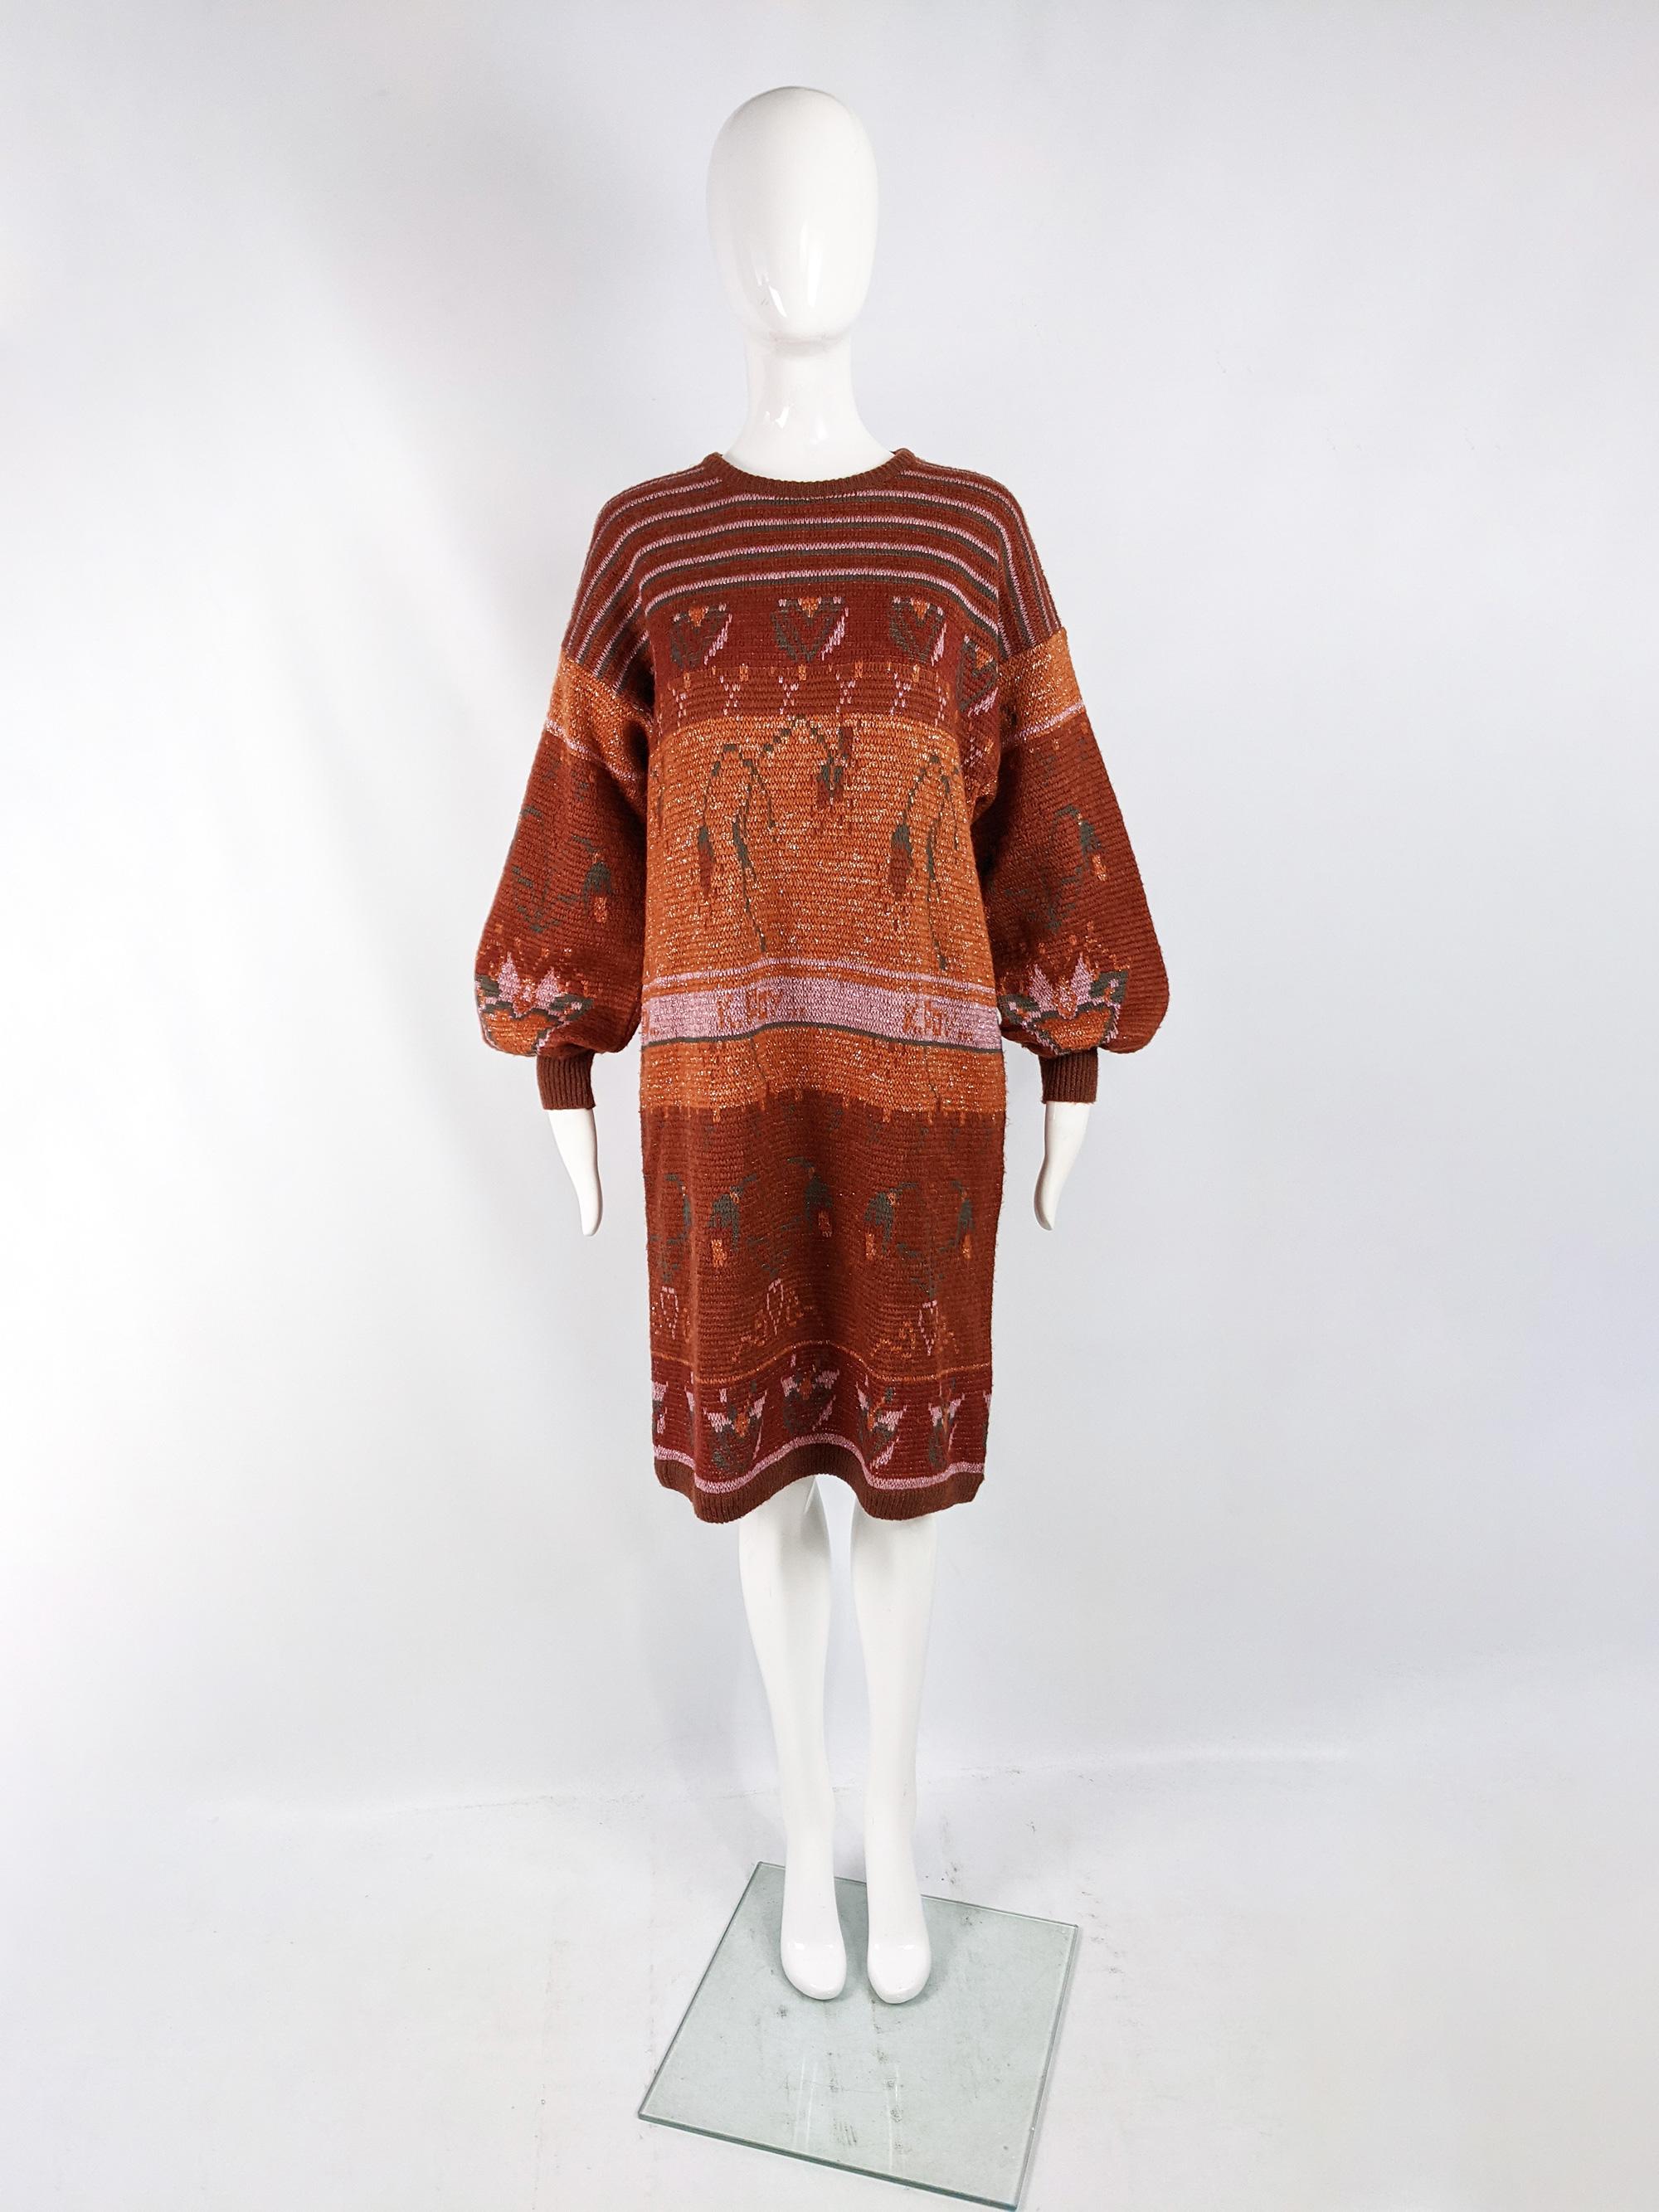 A fabulous vintage womens sweaterdress from the 80s by luxury Italian fashion house, Krizia. In an orange acrylic, wool and kid mohair knit fabric with a lurex thread running throughout. With huge balloon sleeves and a loose, comfy fit that would